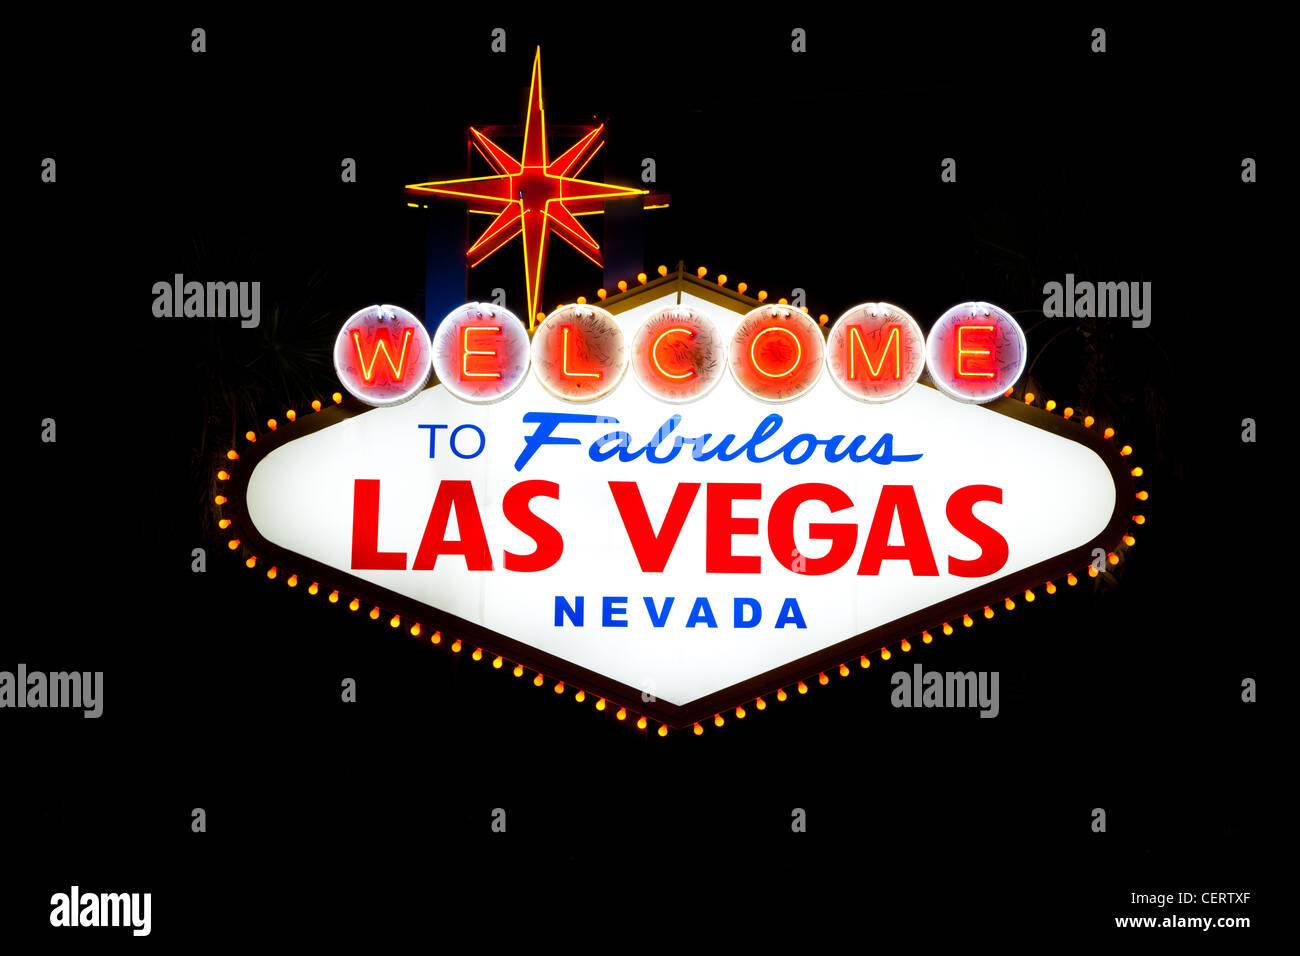 Welcome to Las Vegas Nevada sign at night Stock Photo